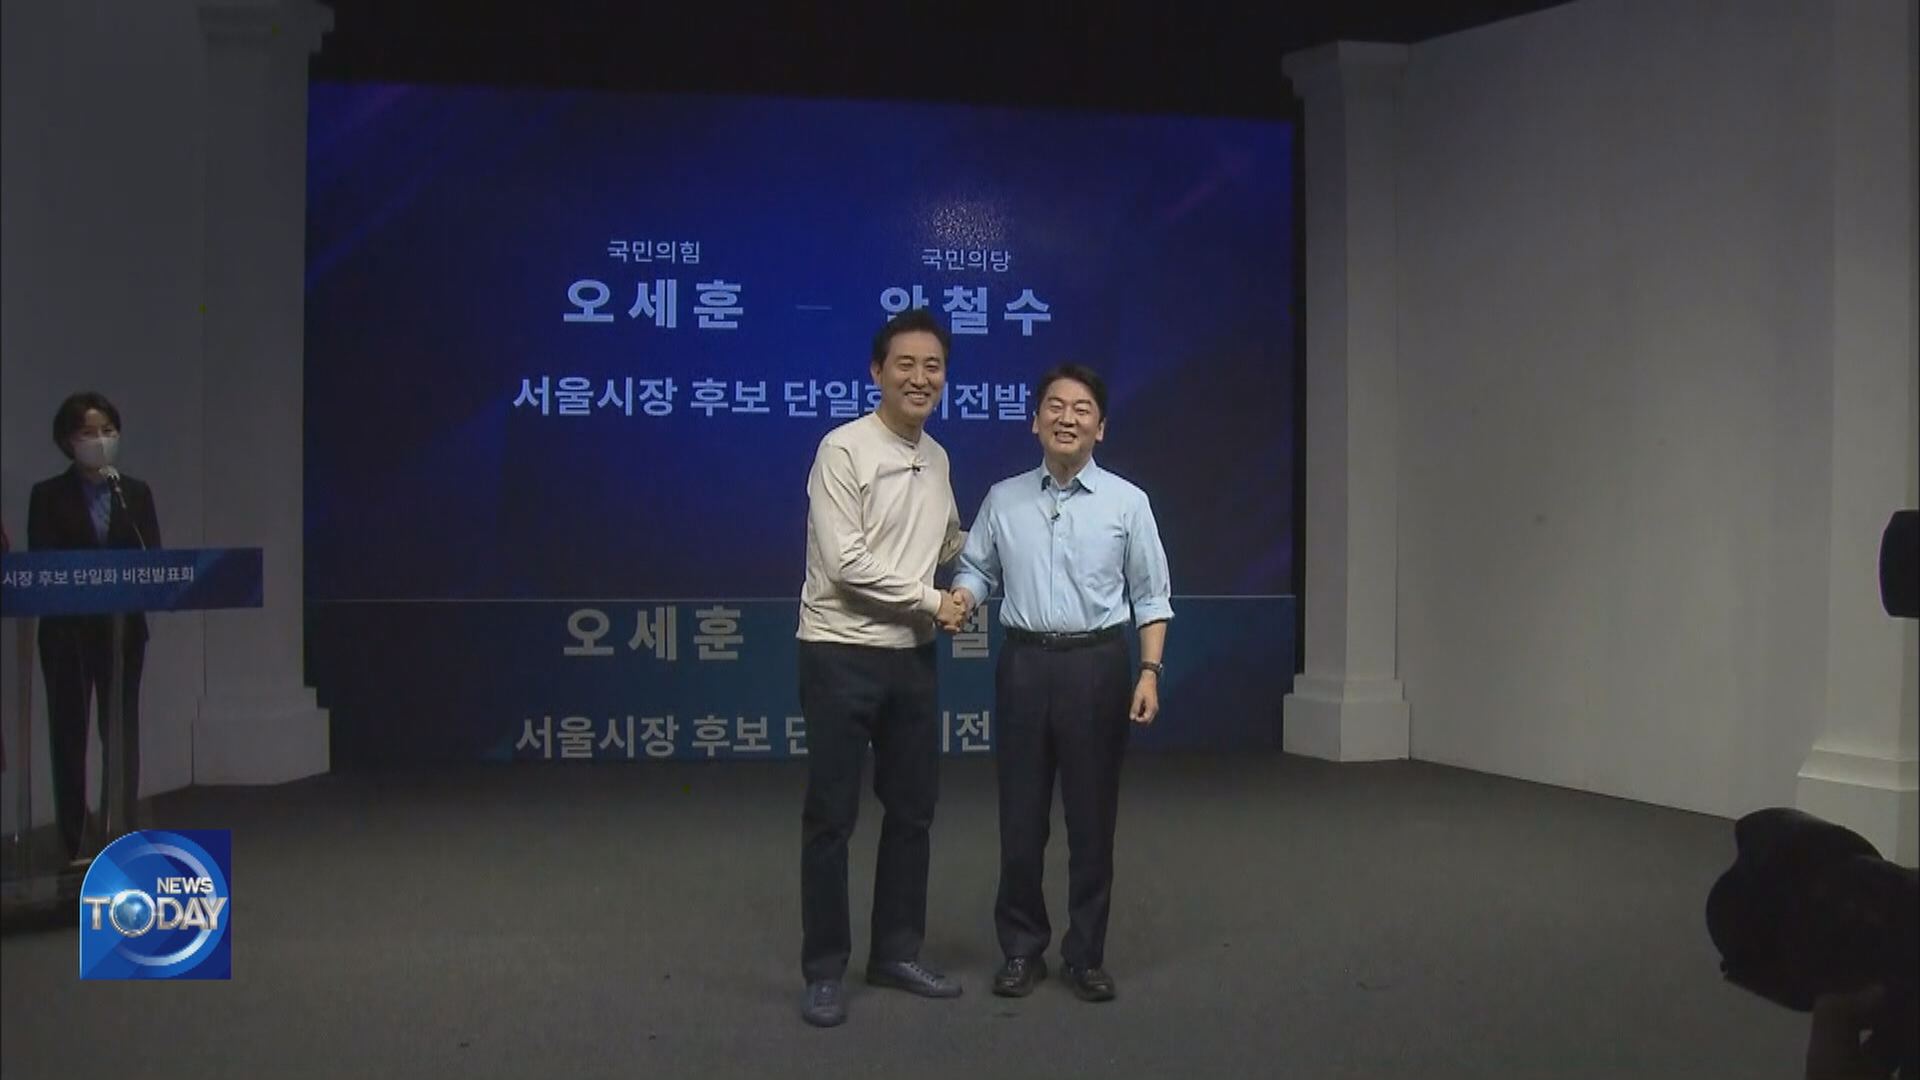 OH AND AHN TO HOLD TELEVISED DEBATE